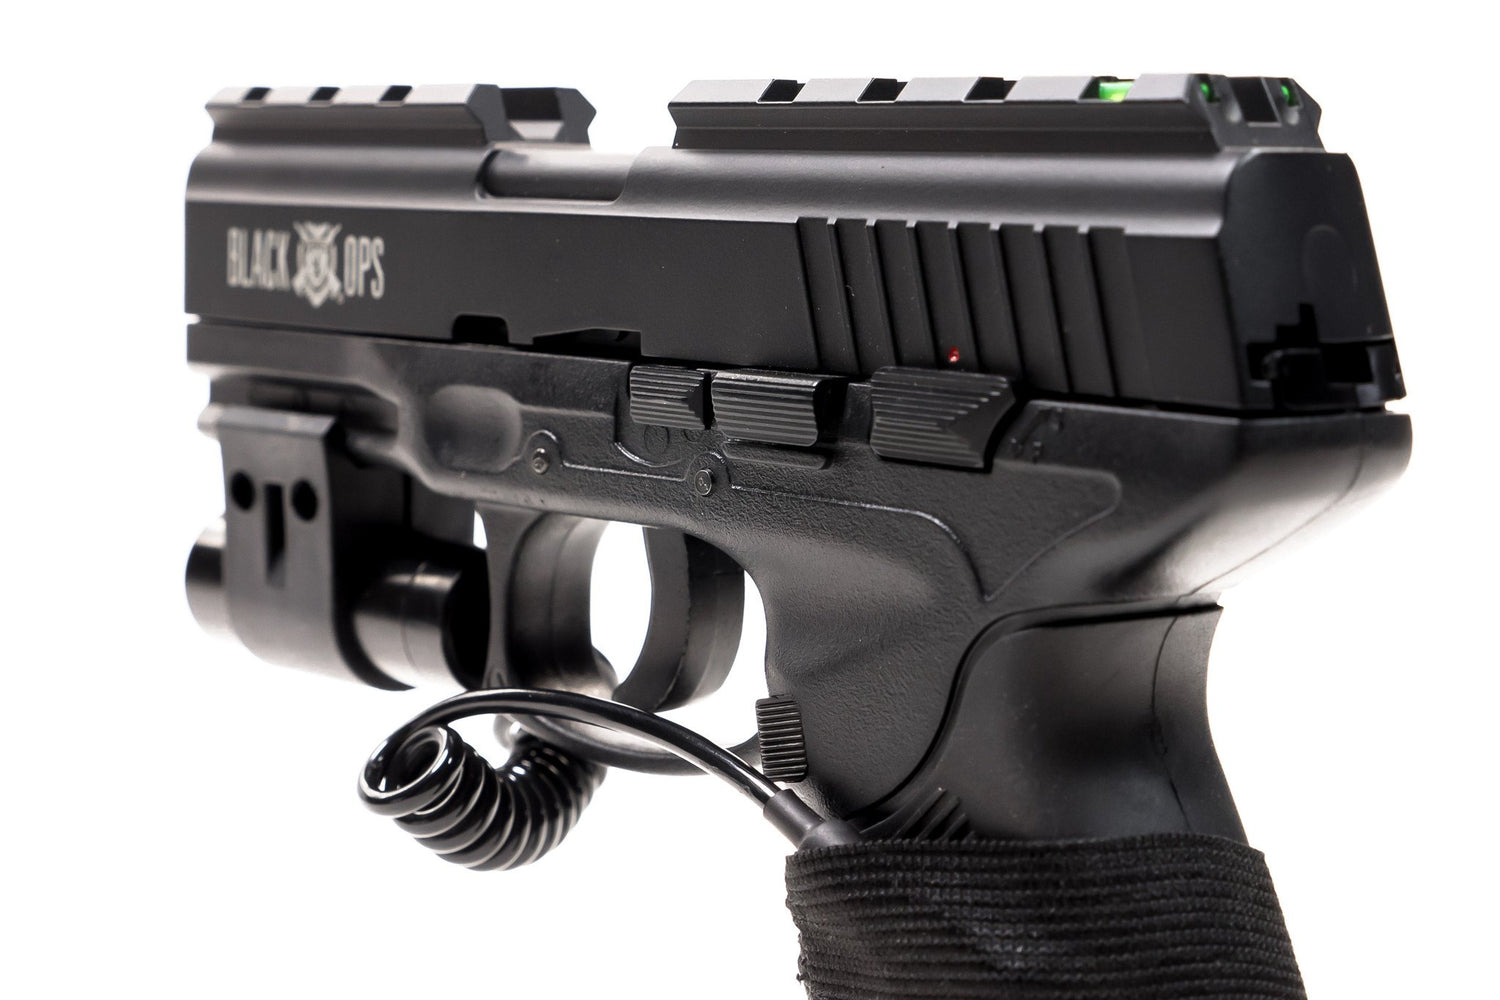 Wolverine Tactical CO2 airsoft pistol with laser sight – Barra Airguns